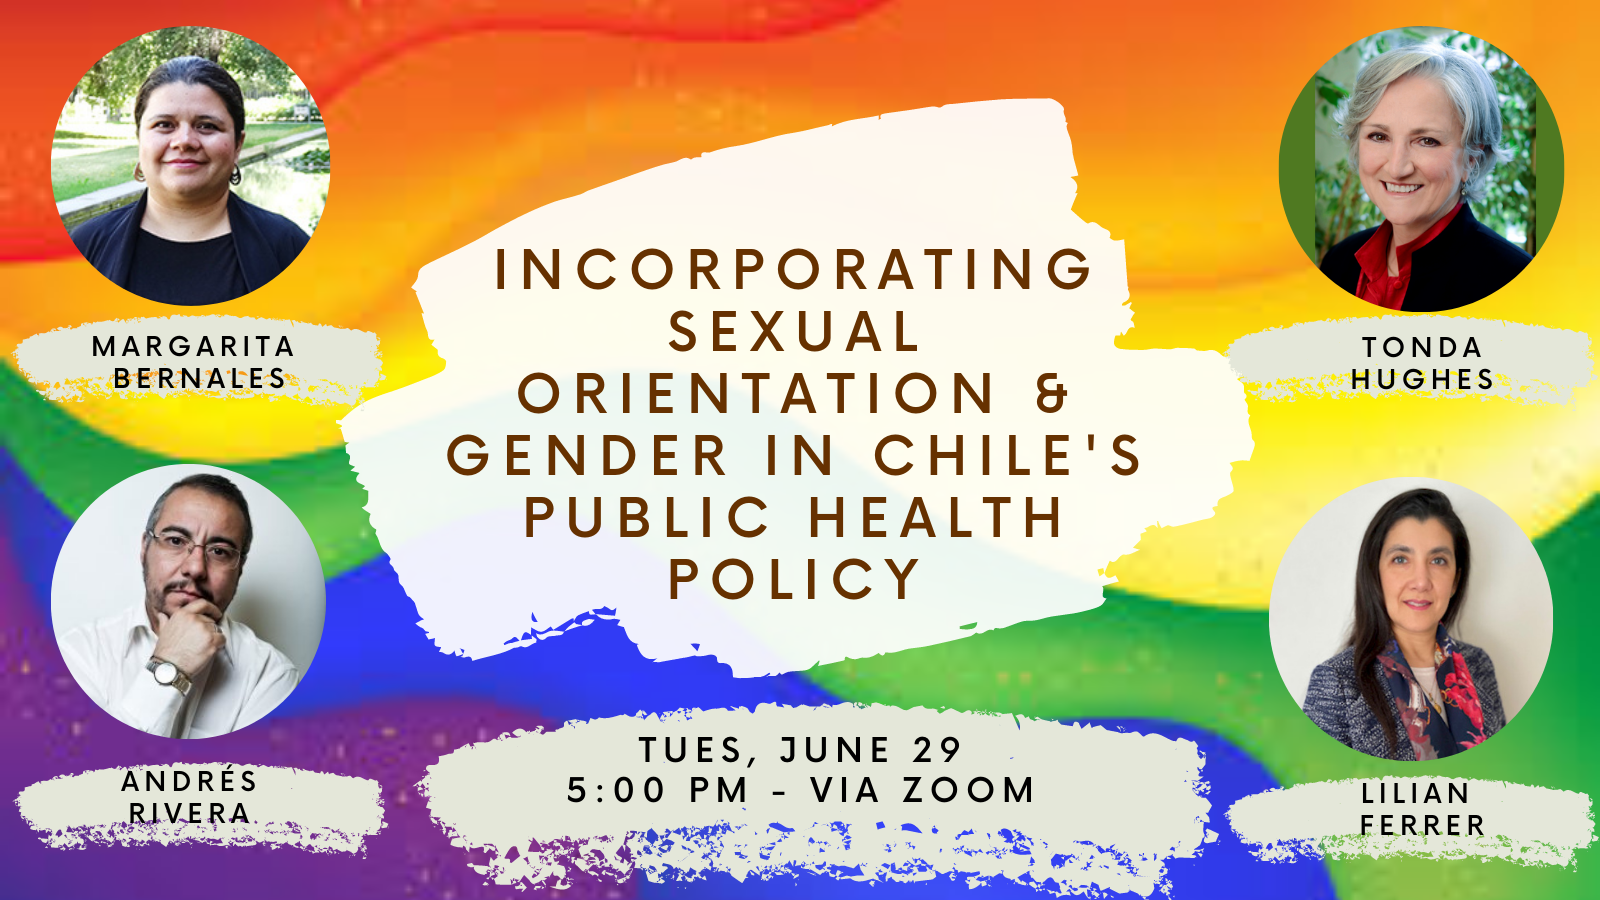 Incorporating Sexual Orientation & Gender in Chile’s Public Health Policy